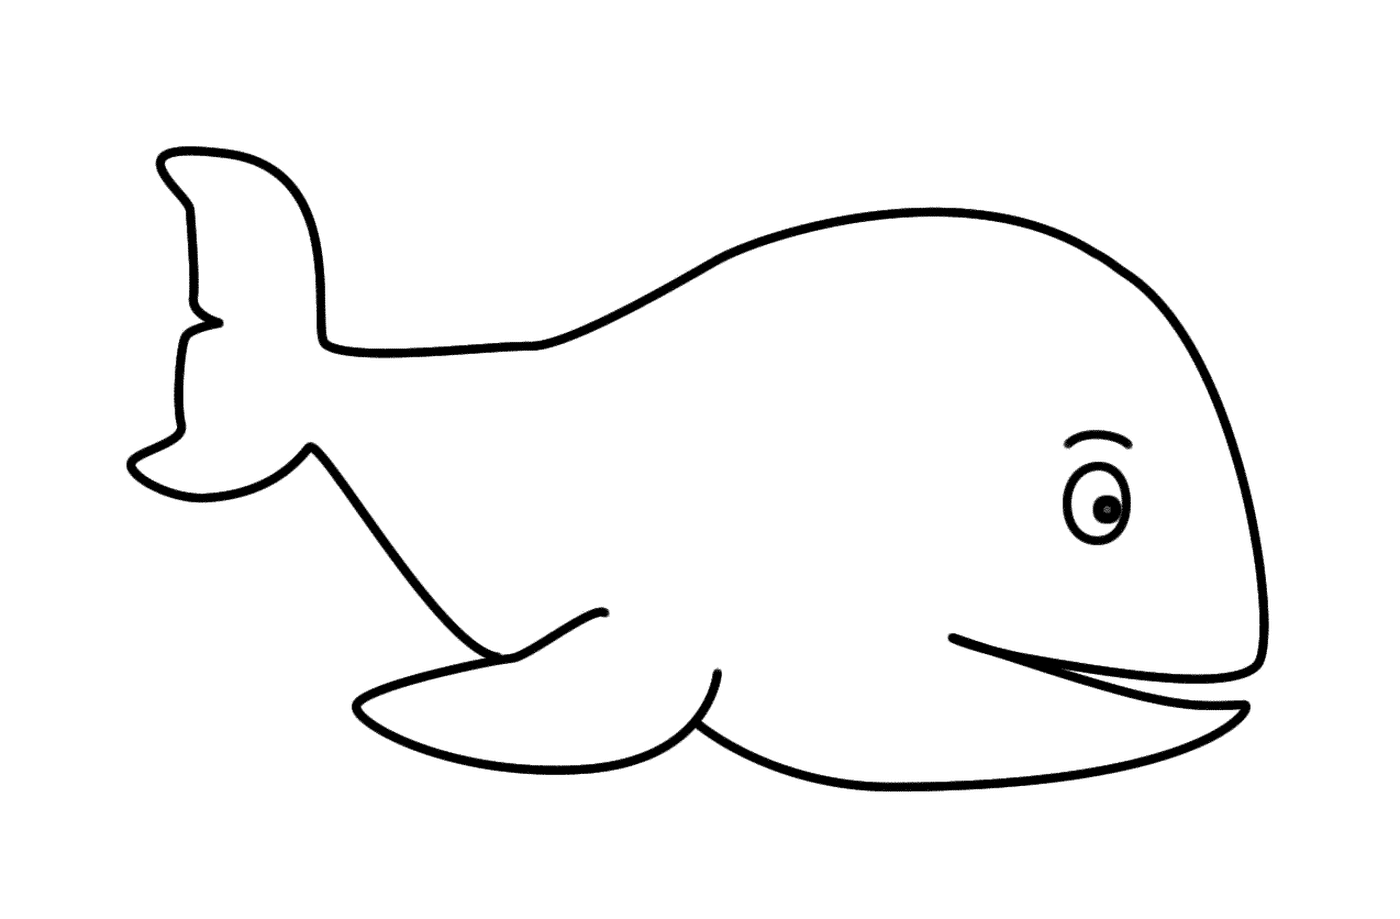  the outline of an animal is shown 